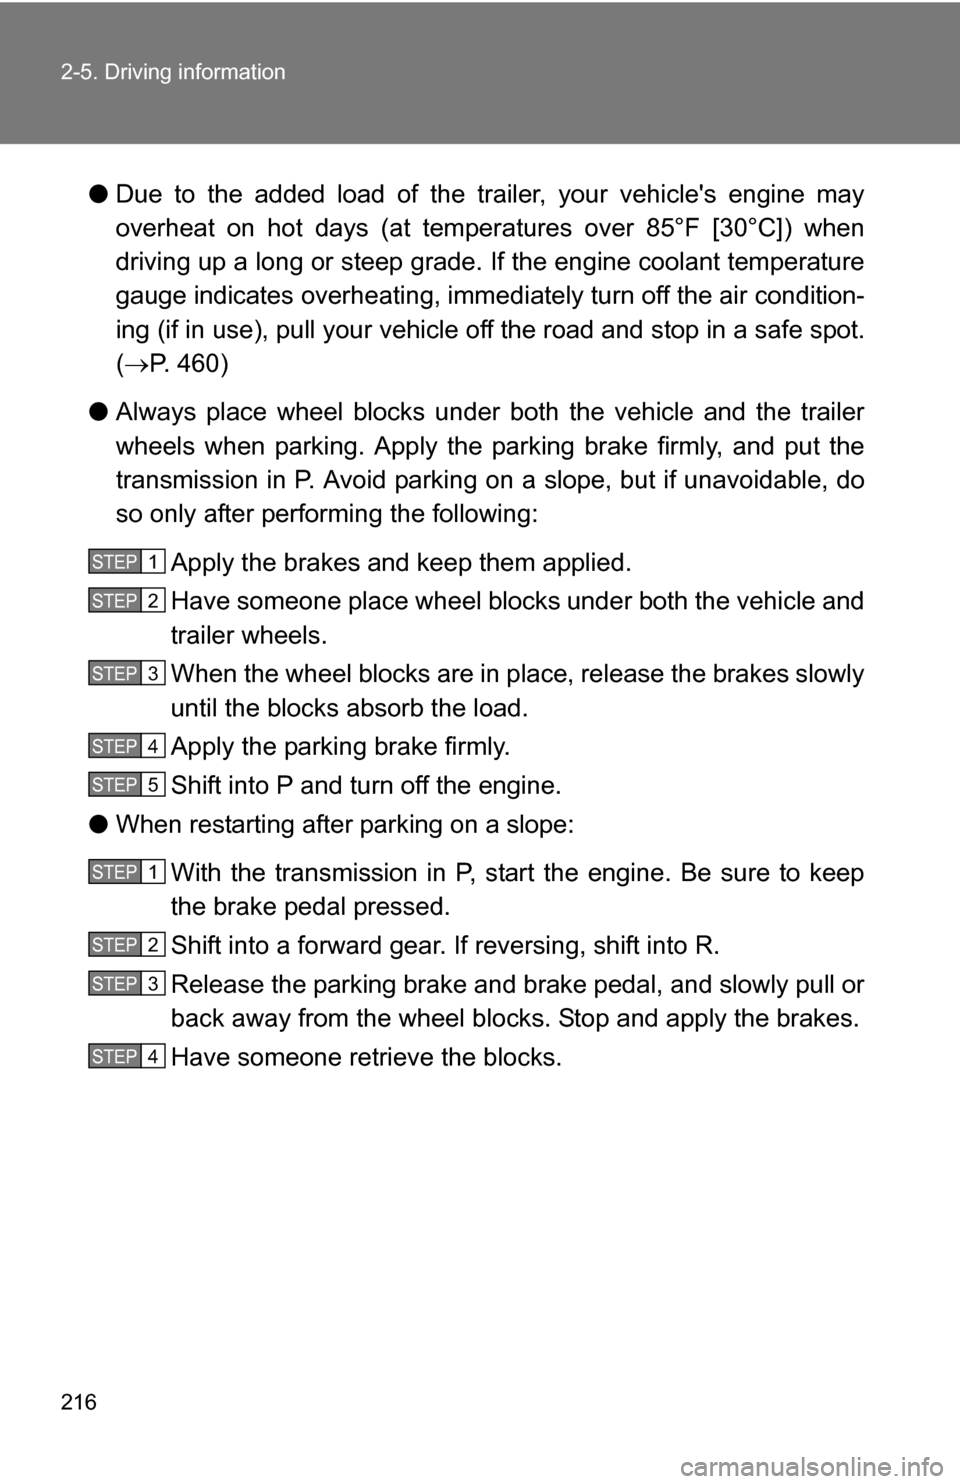 TOYOTA RAV4 2009 XA30 / 3.G Owners Manual 216 2-5. Driving information
●Due to the added load of the trailer, your vehicles engine may
overheat on hot days (at temper atures over 85°F [30°C]) when
driving up a long or steep grade. If the